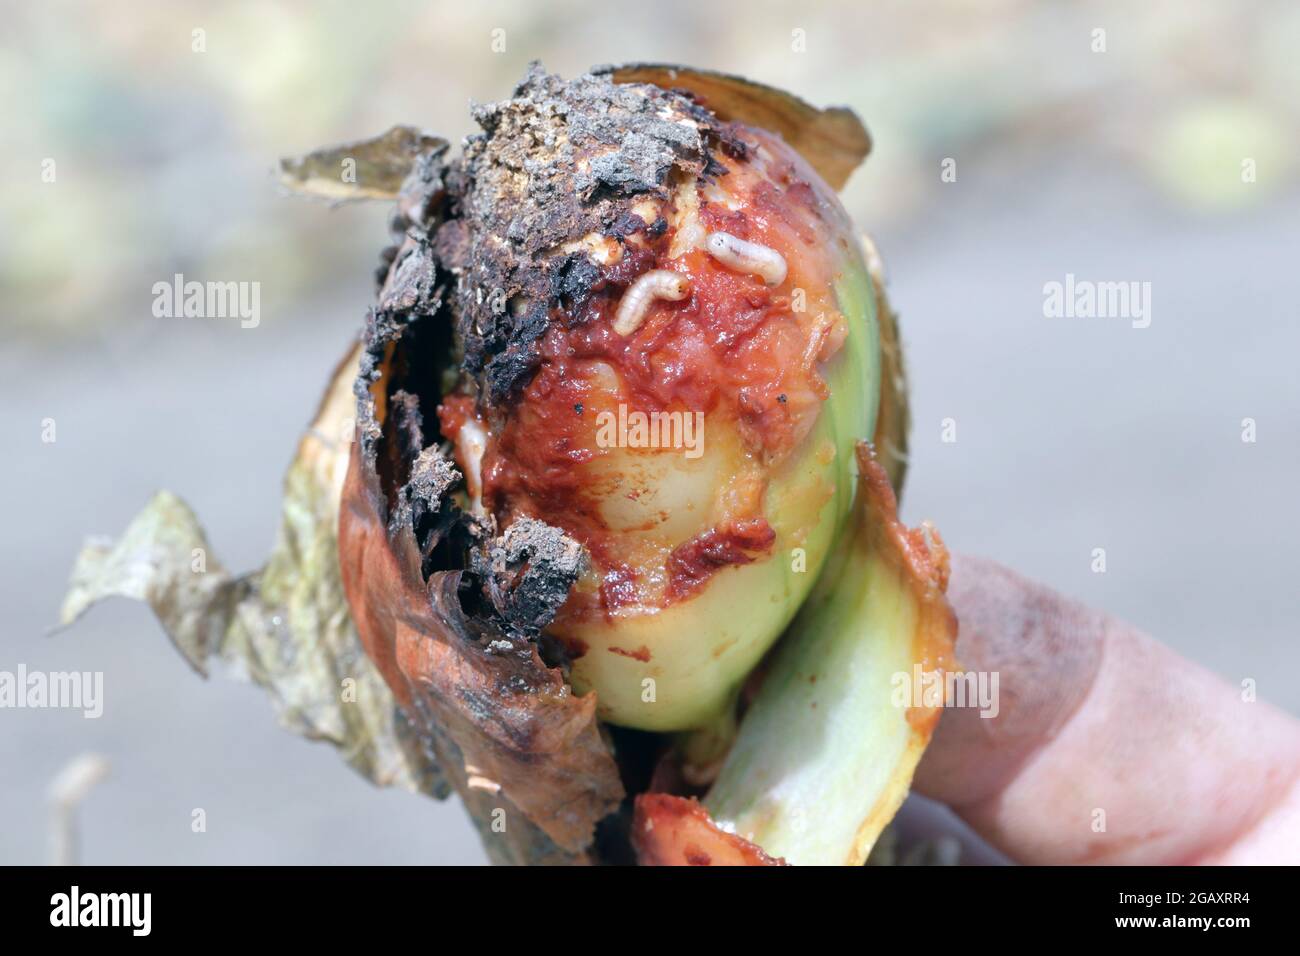 Onion damaged by Delia antiqua, commonly known as the onion fly, is a cosmopolitan pest of crops. The larvae or maggots feed on onions, garlic etc. Stock Photo